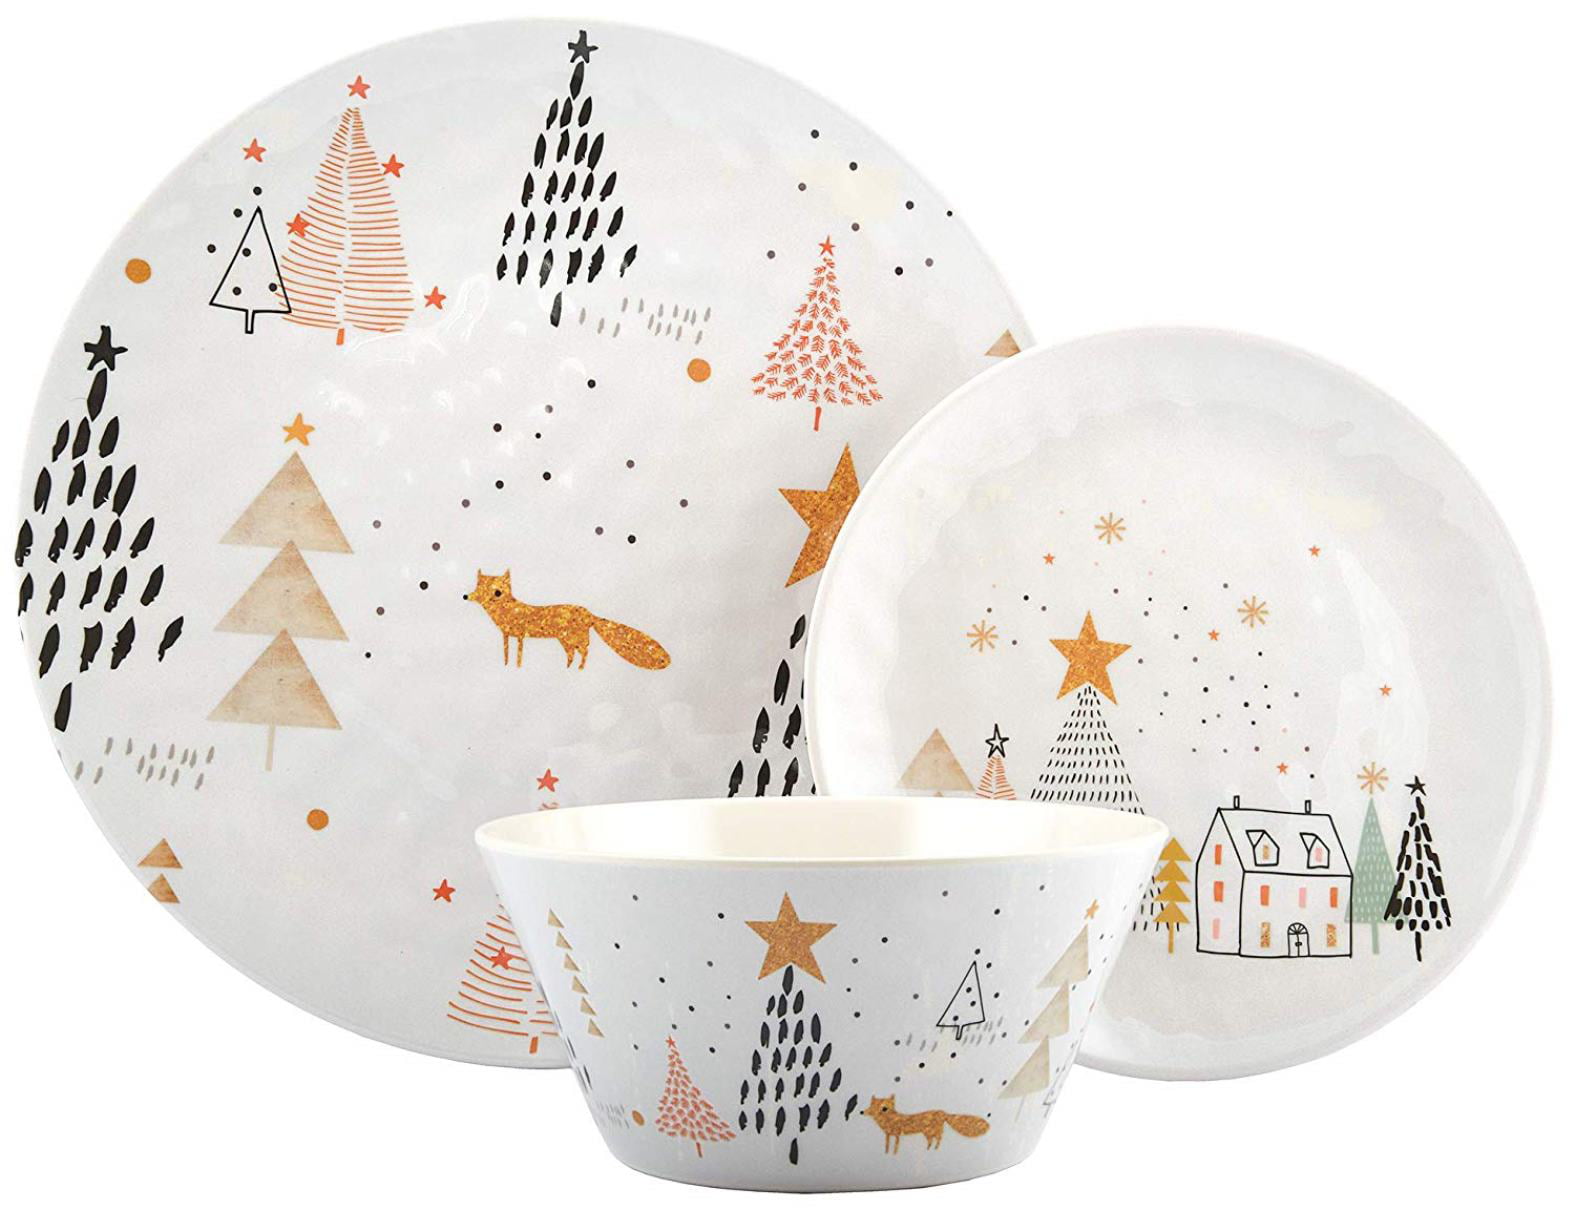 Paper Plate Collection Melange 54-Piece Melamine Dinnerware Set Salad Plate & Soup Bowl | Shatter-Proof and Chip-Resistant Melamine Plates and Bowls Dinner Plate Color: White 18 Each 